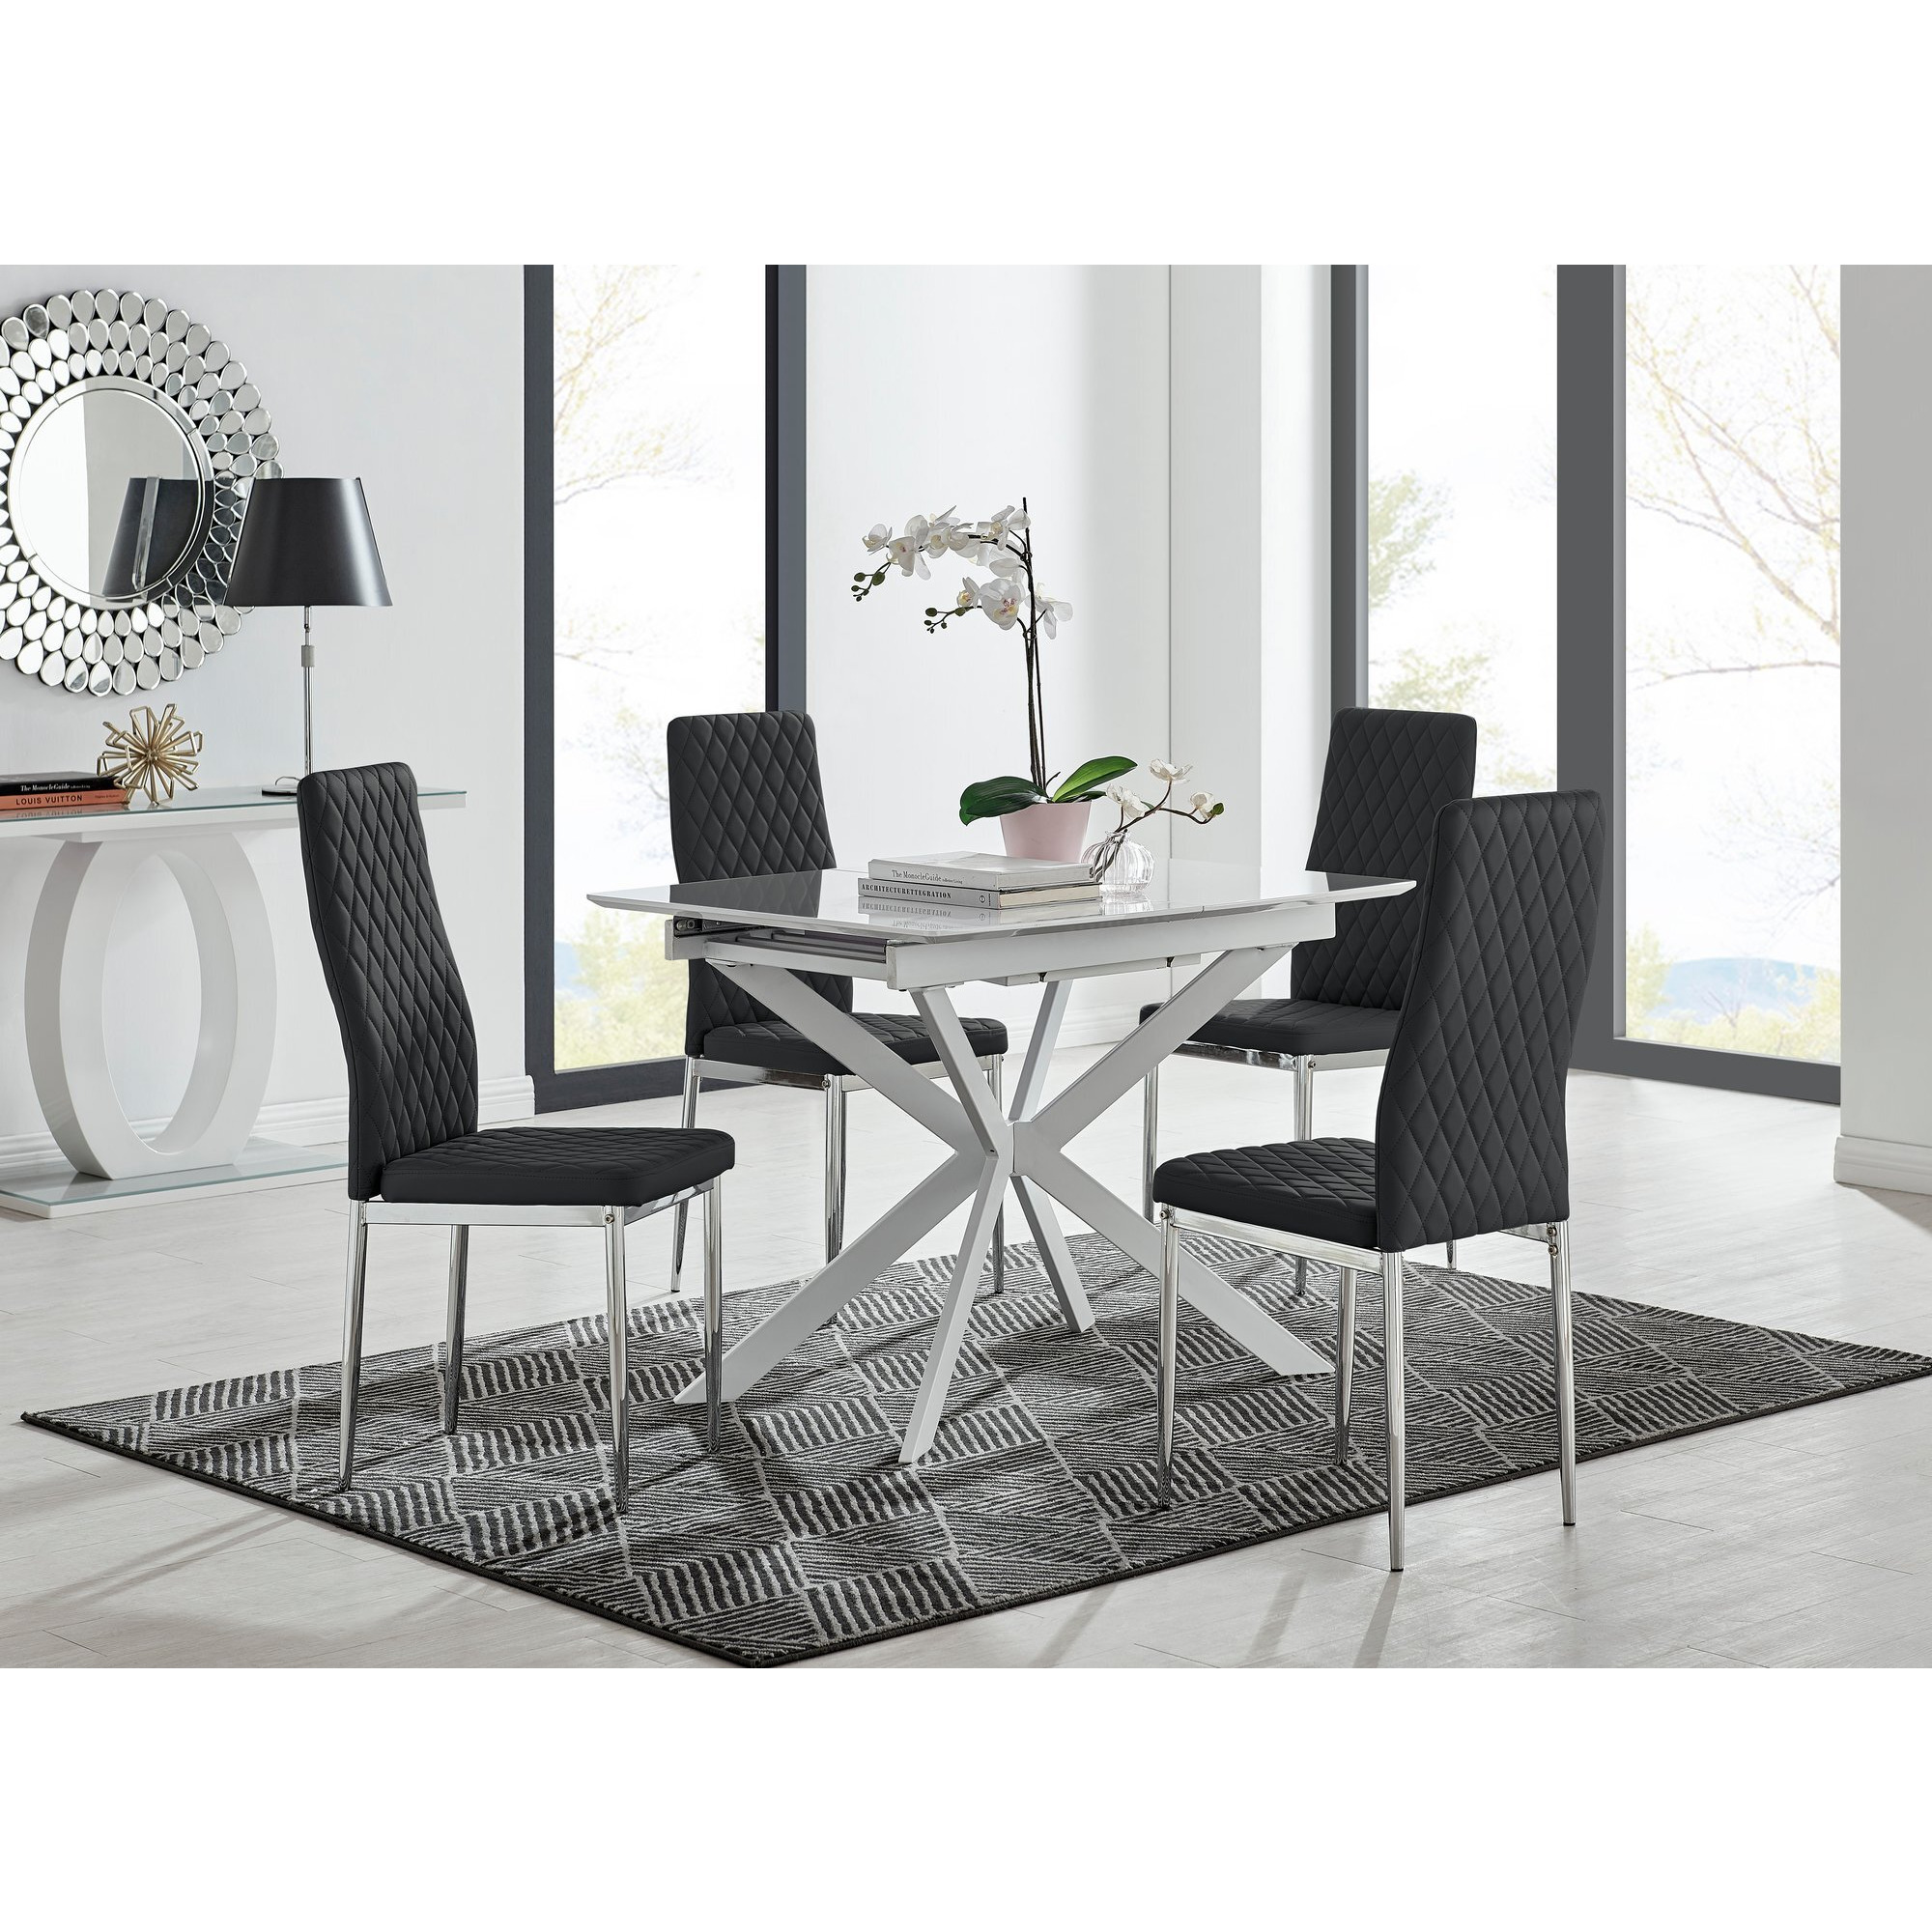 Lira 120 Extending Dining Table and 4 Milan Chrome Leg Chairs